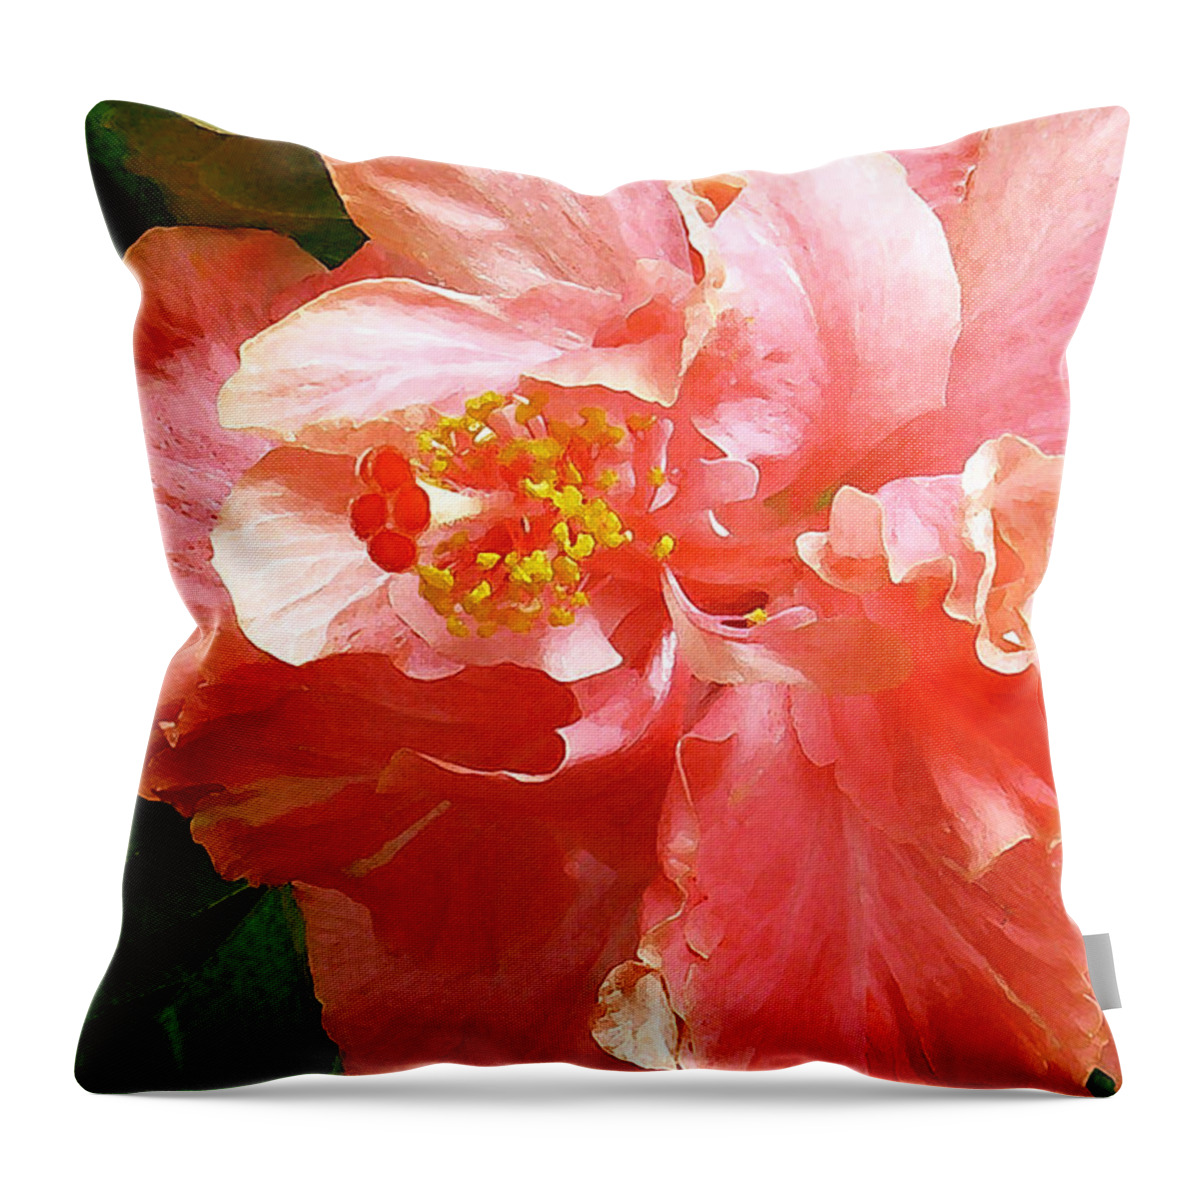 Hibiscus Throw Pillow featuring the digital art Bright Pink Hibiscus by James Temple